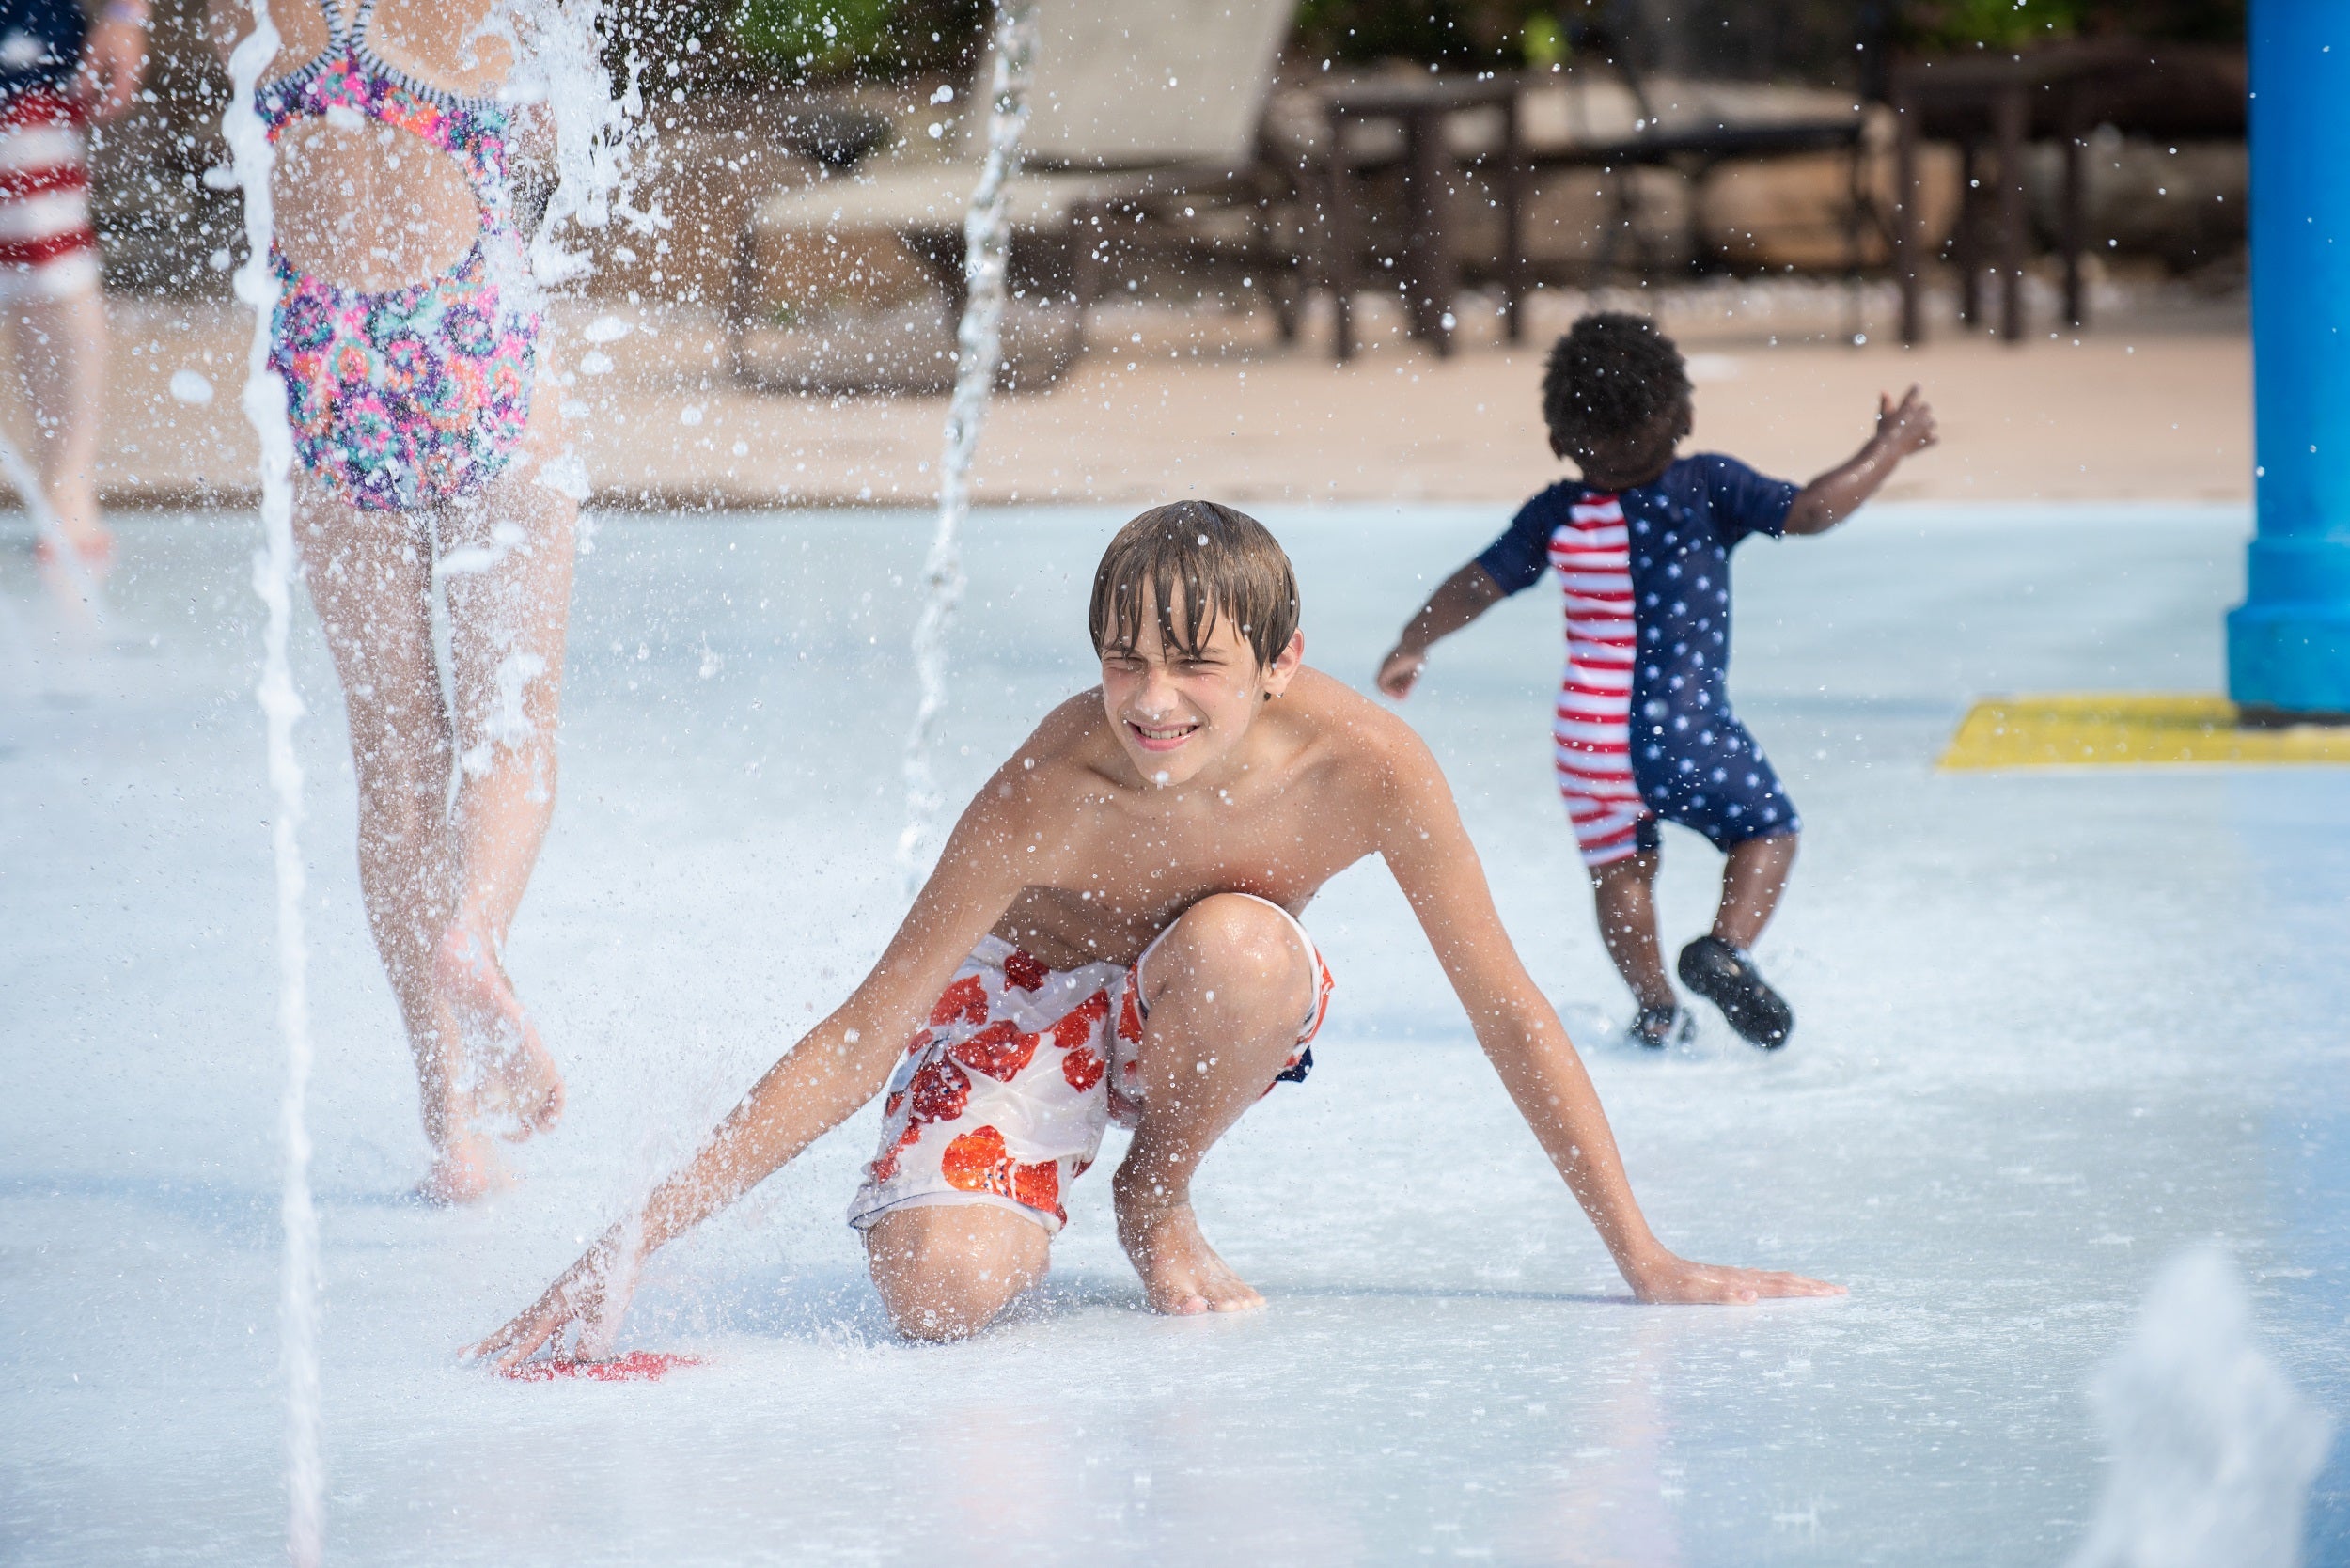 Check out our splash park for another great way to cool off!